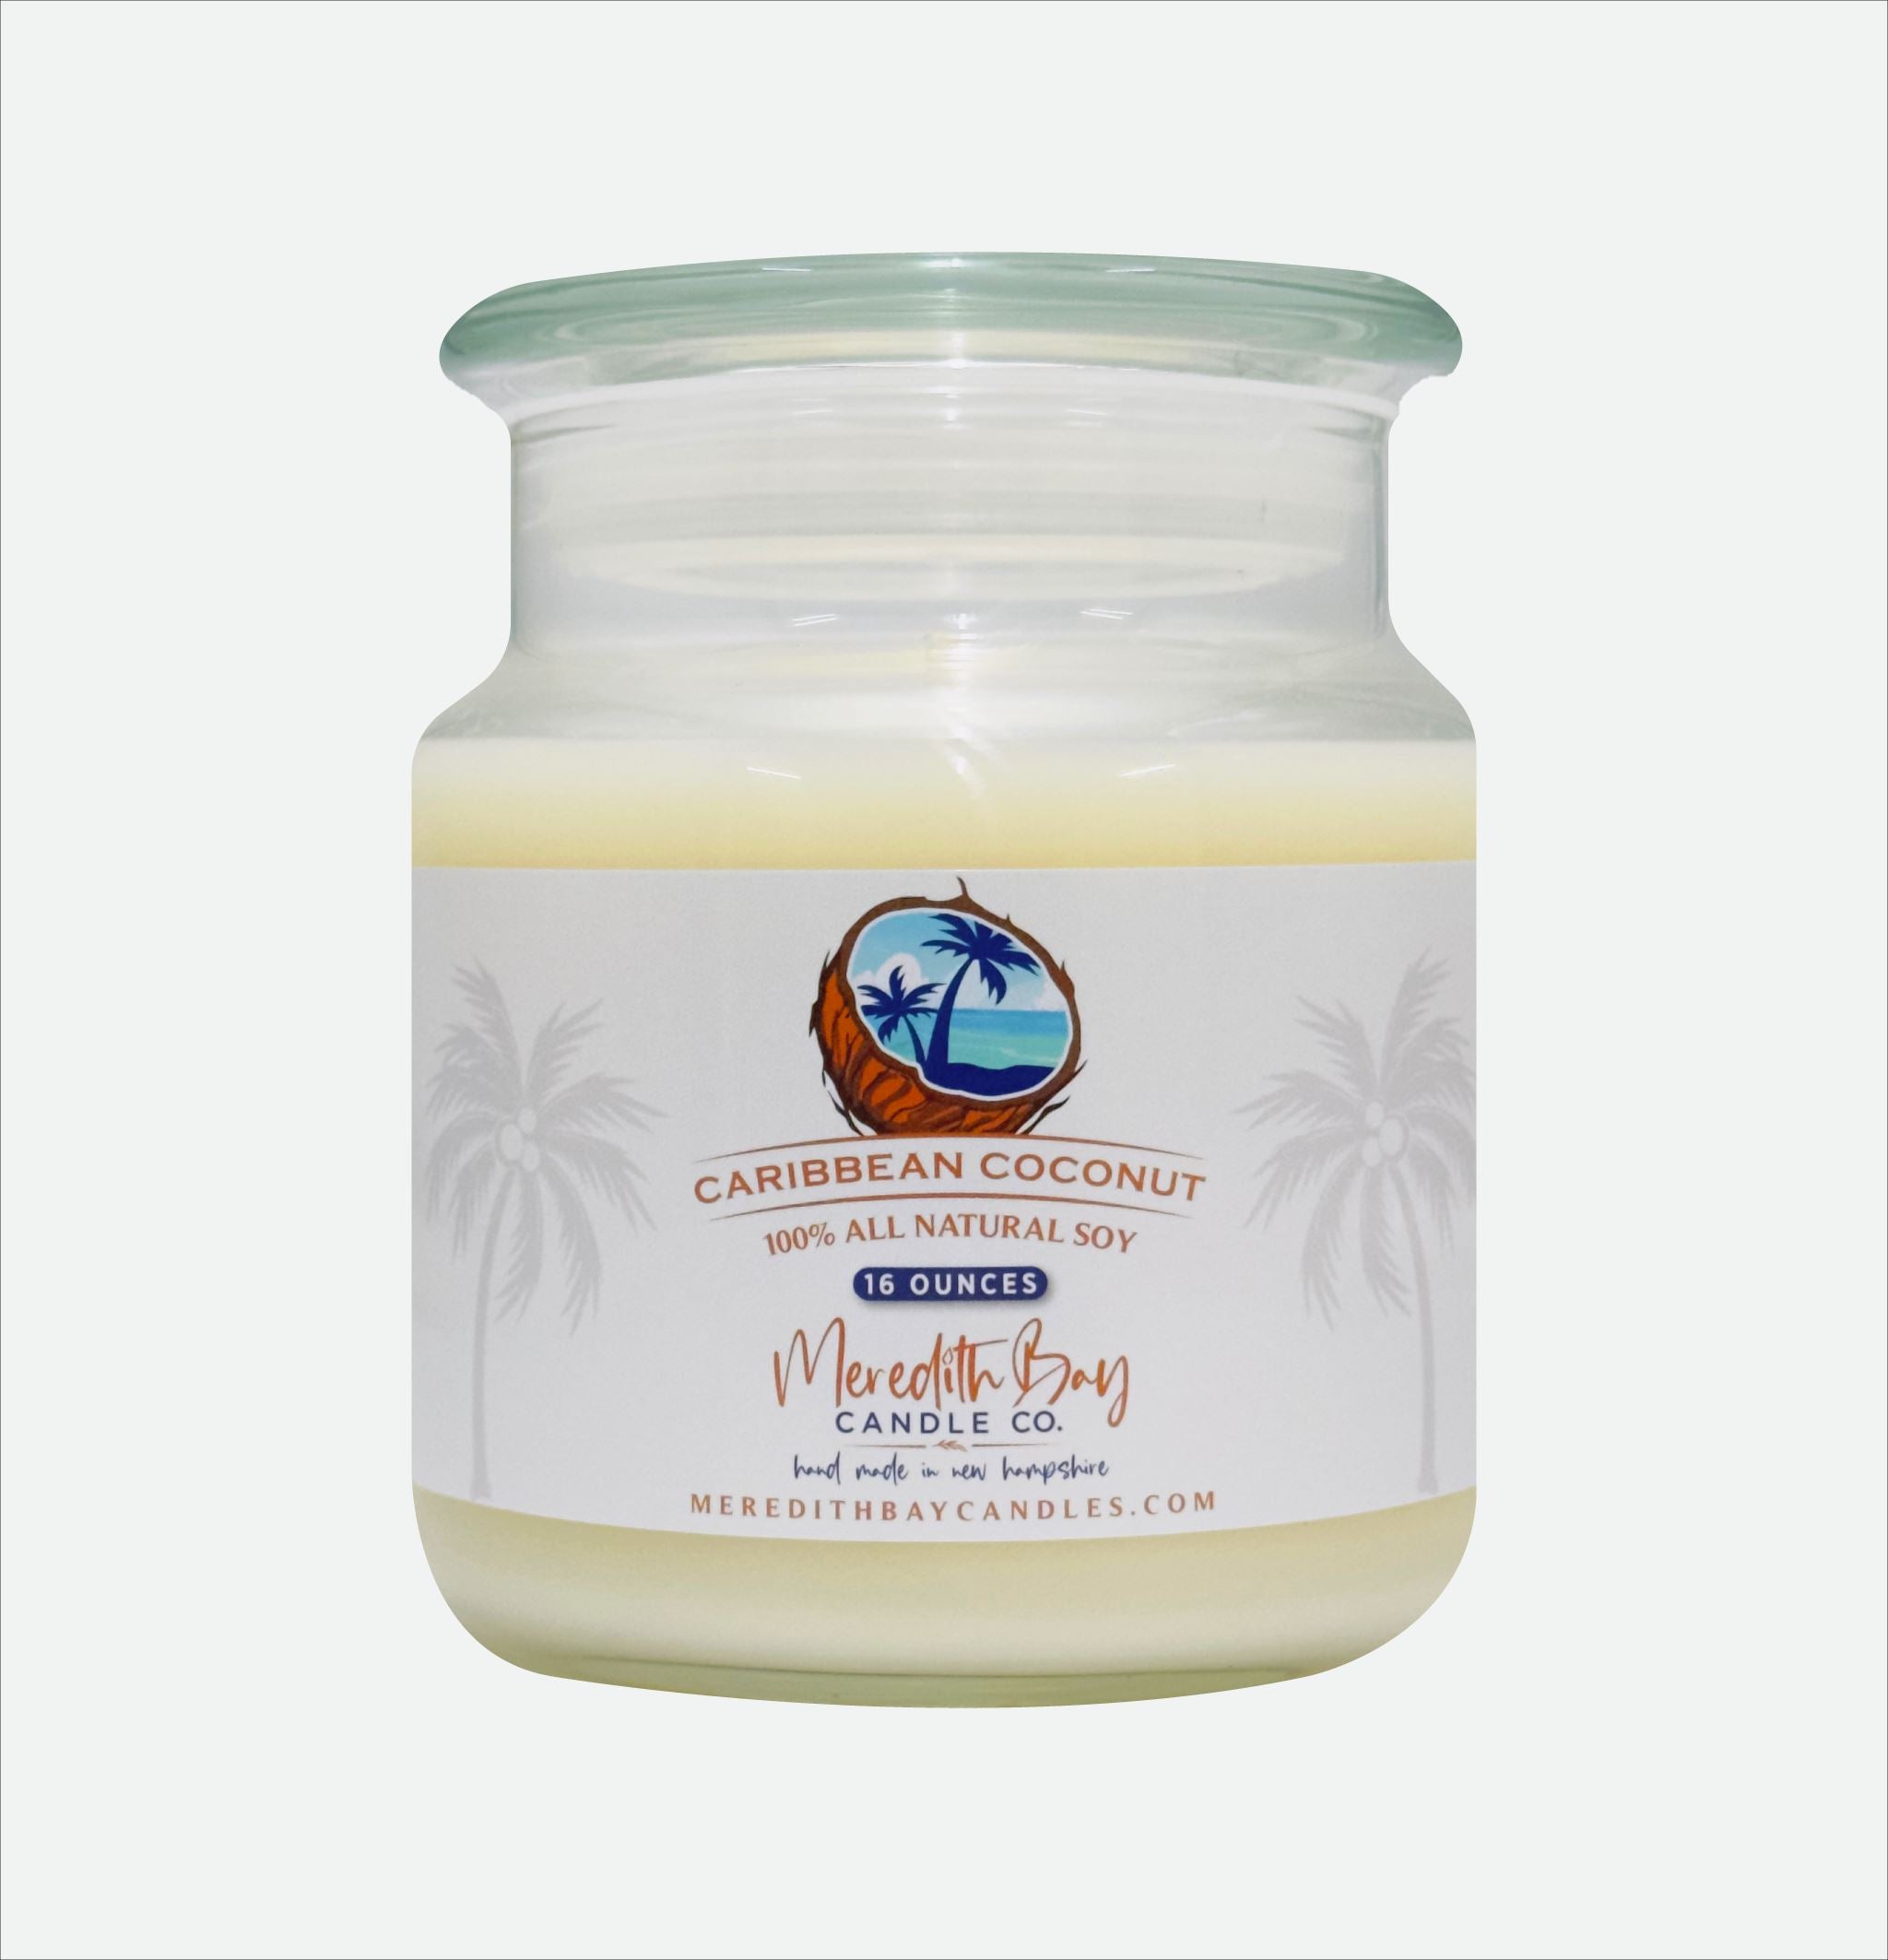 Caribbean Coconut Soy Candle Meredith Bay Candle Co 16 Oz 